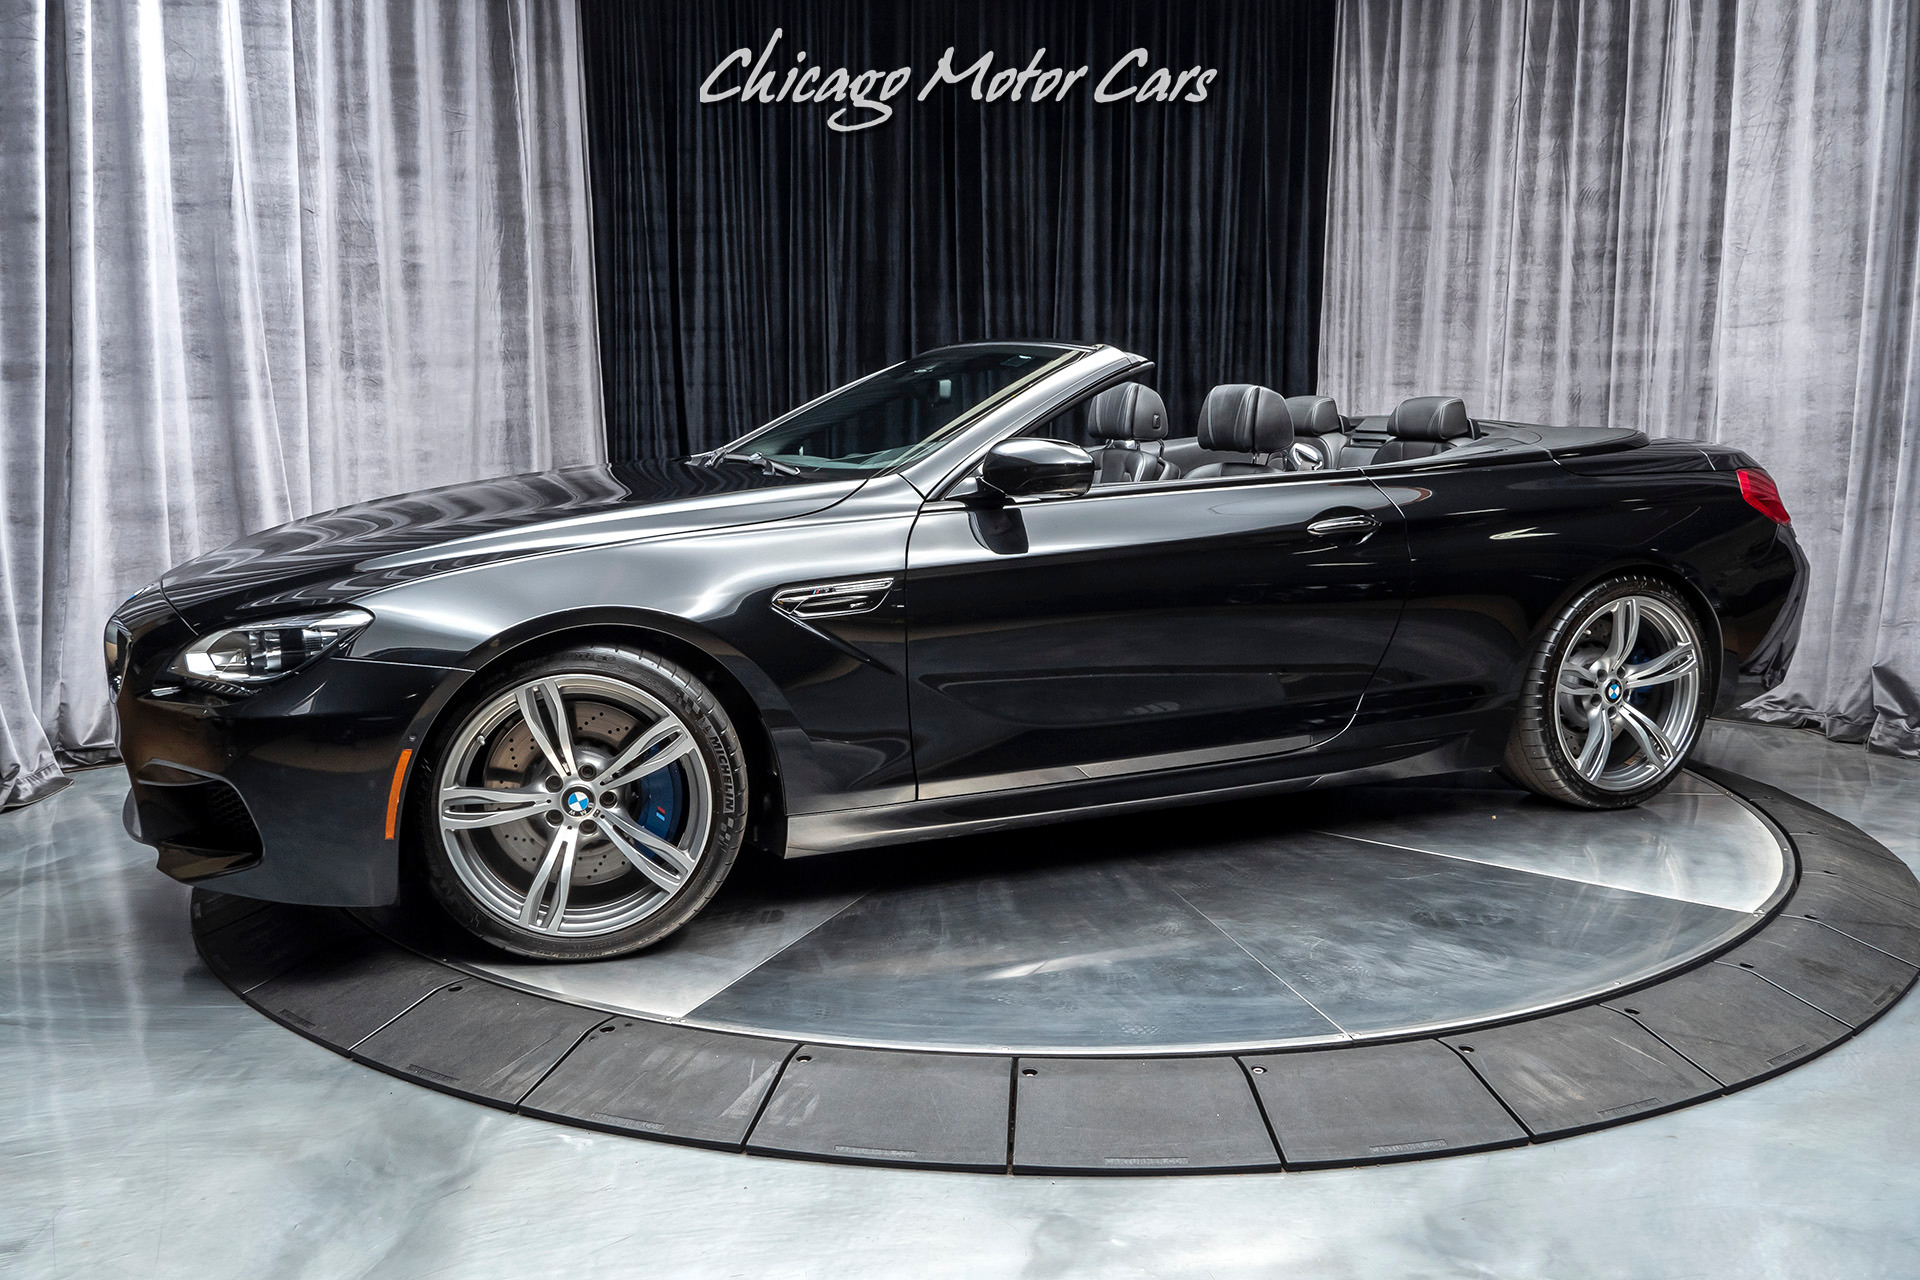 Used 2014 BMW M6 Convertible MSRP $125K+ For Sale (Special Pricing) |  Chicago Motor Cars Stock #16036